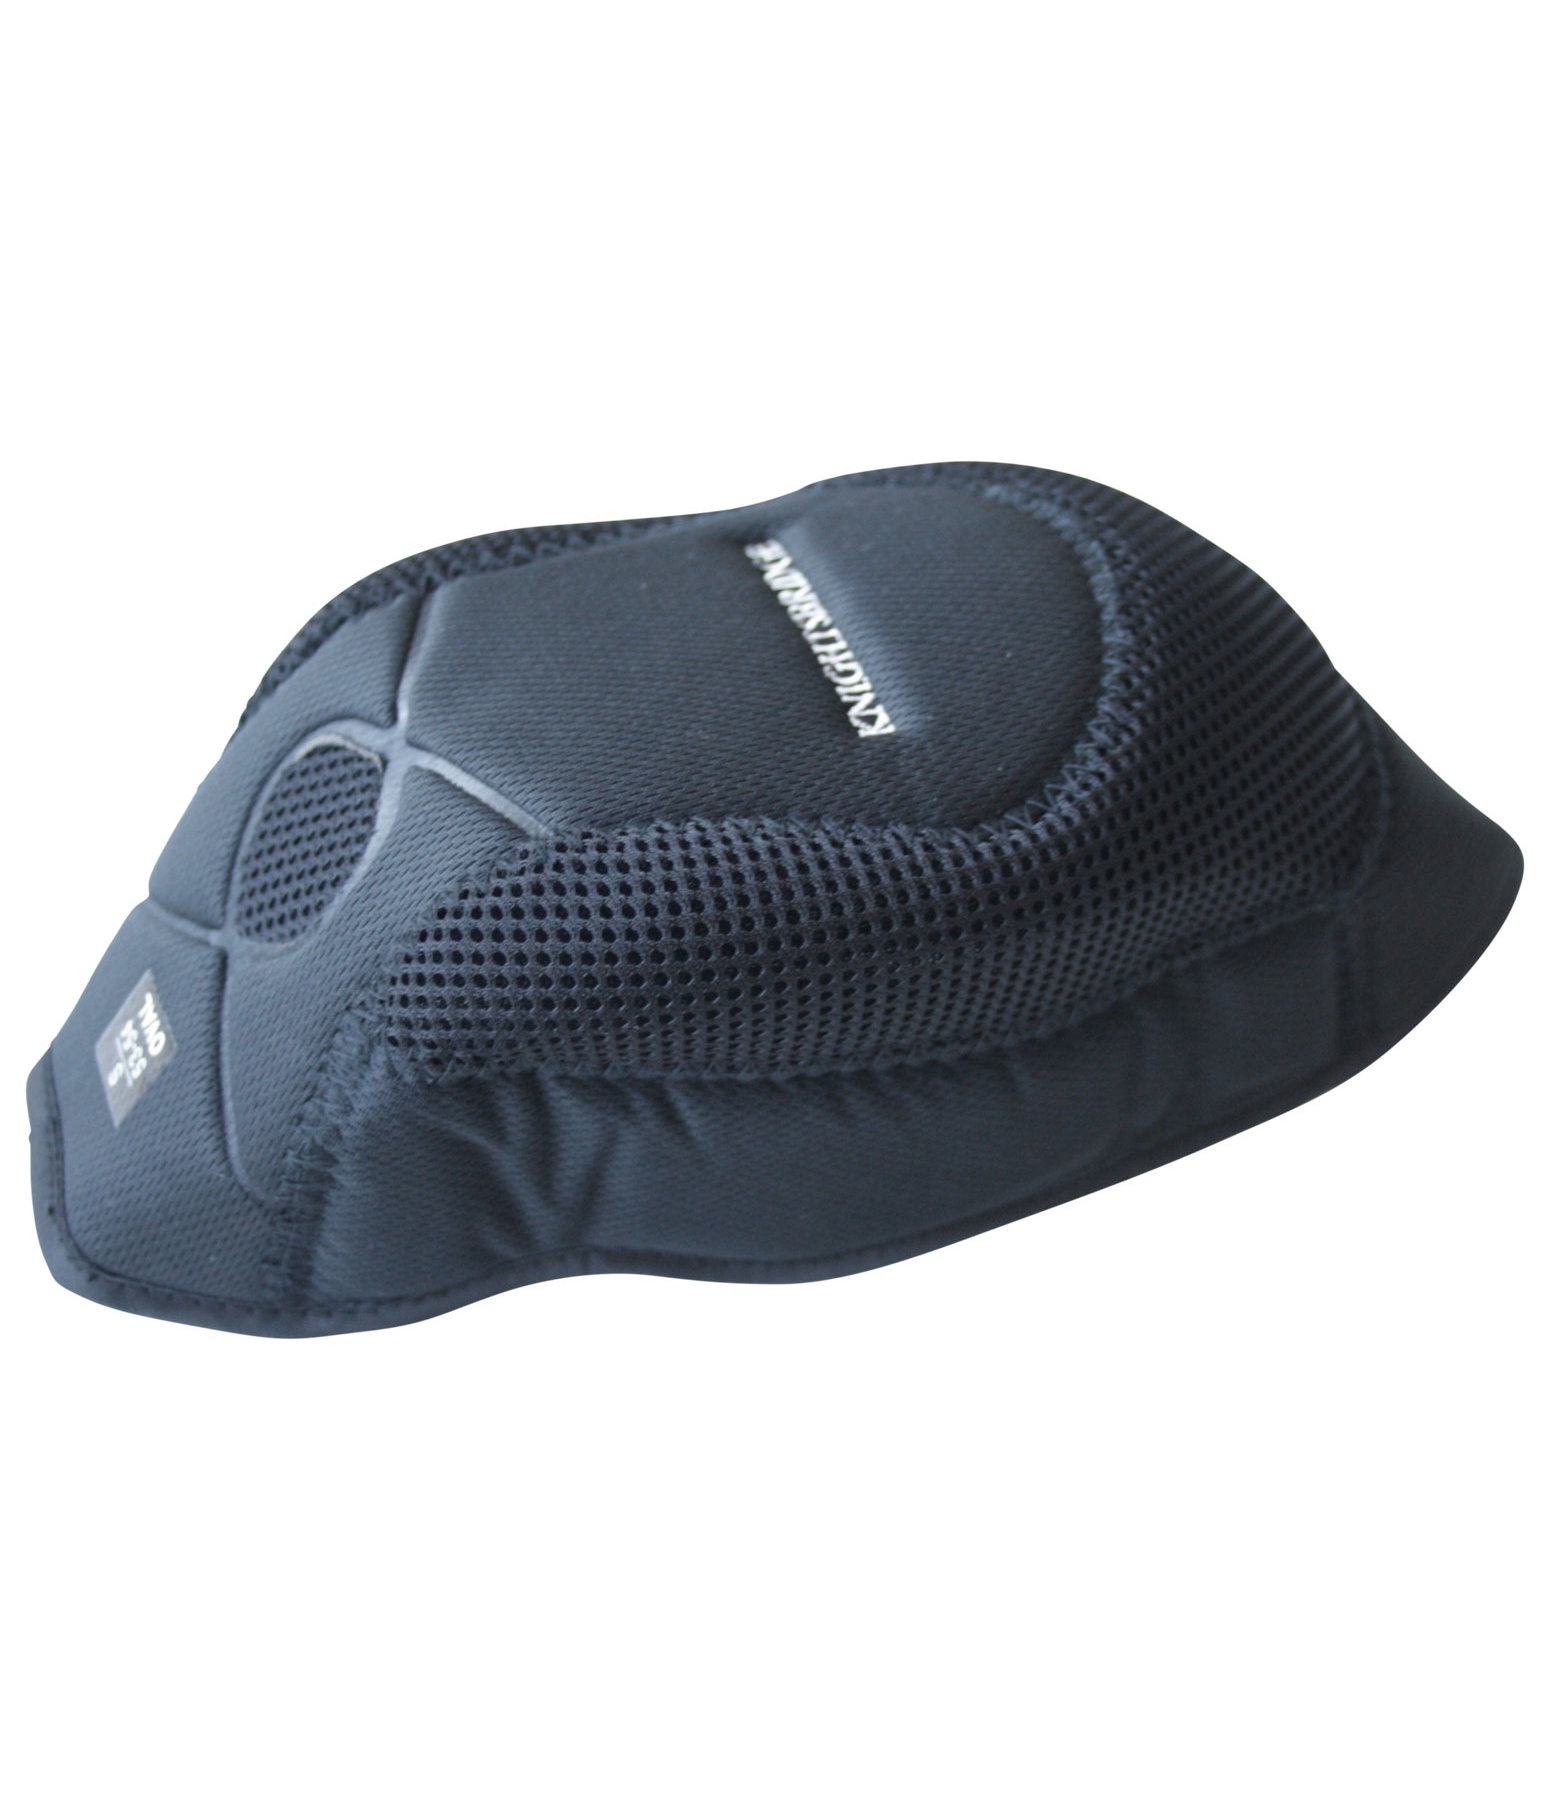 Lining oval COOLMAX for Riding Hat Evident